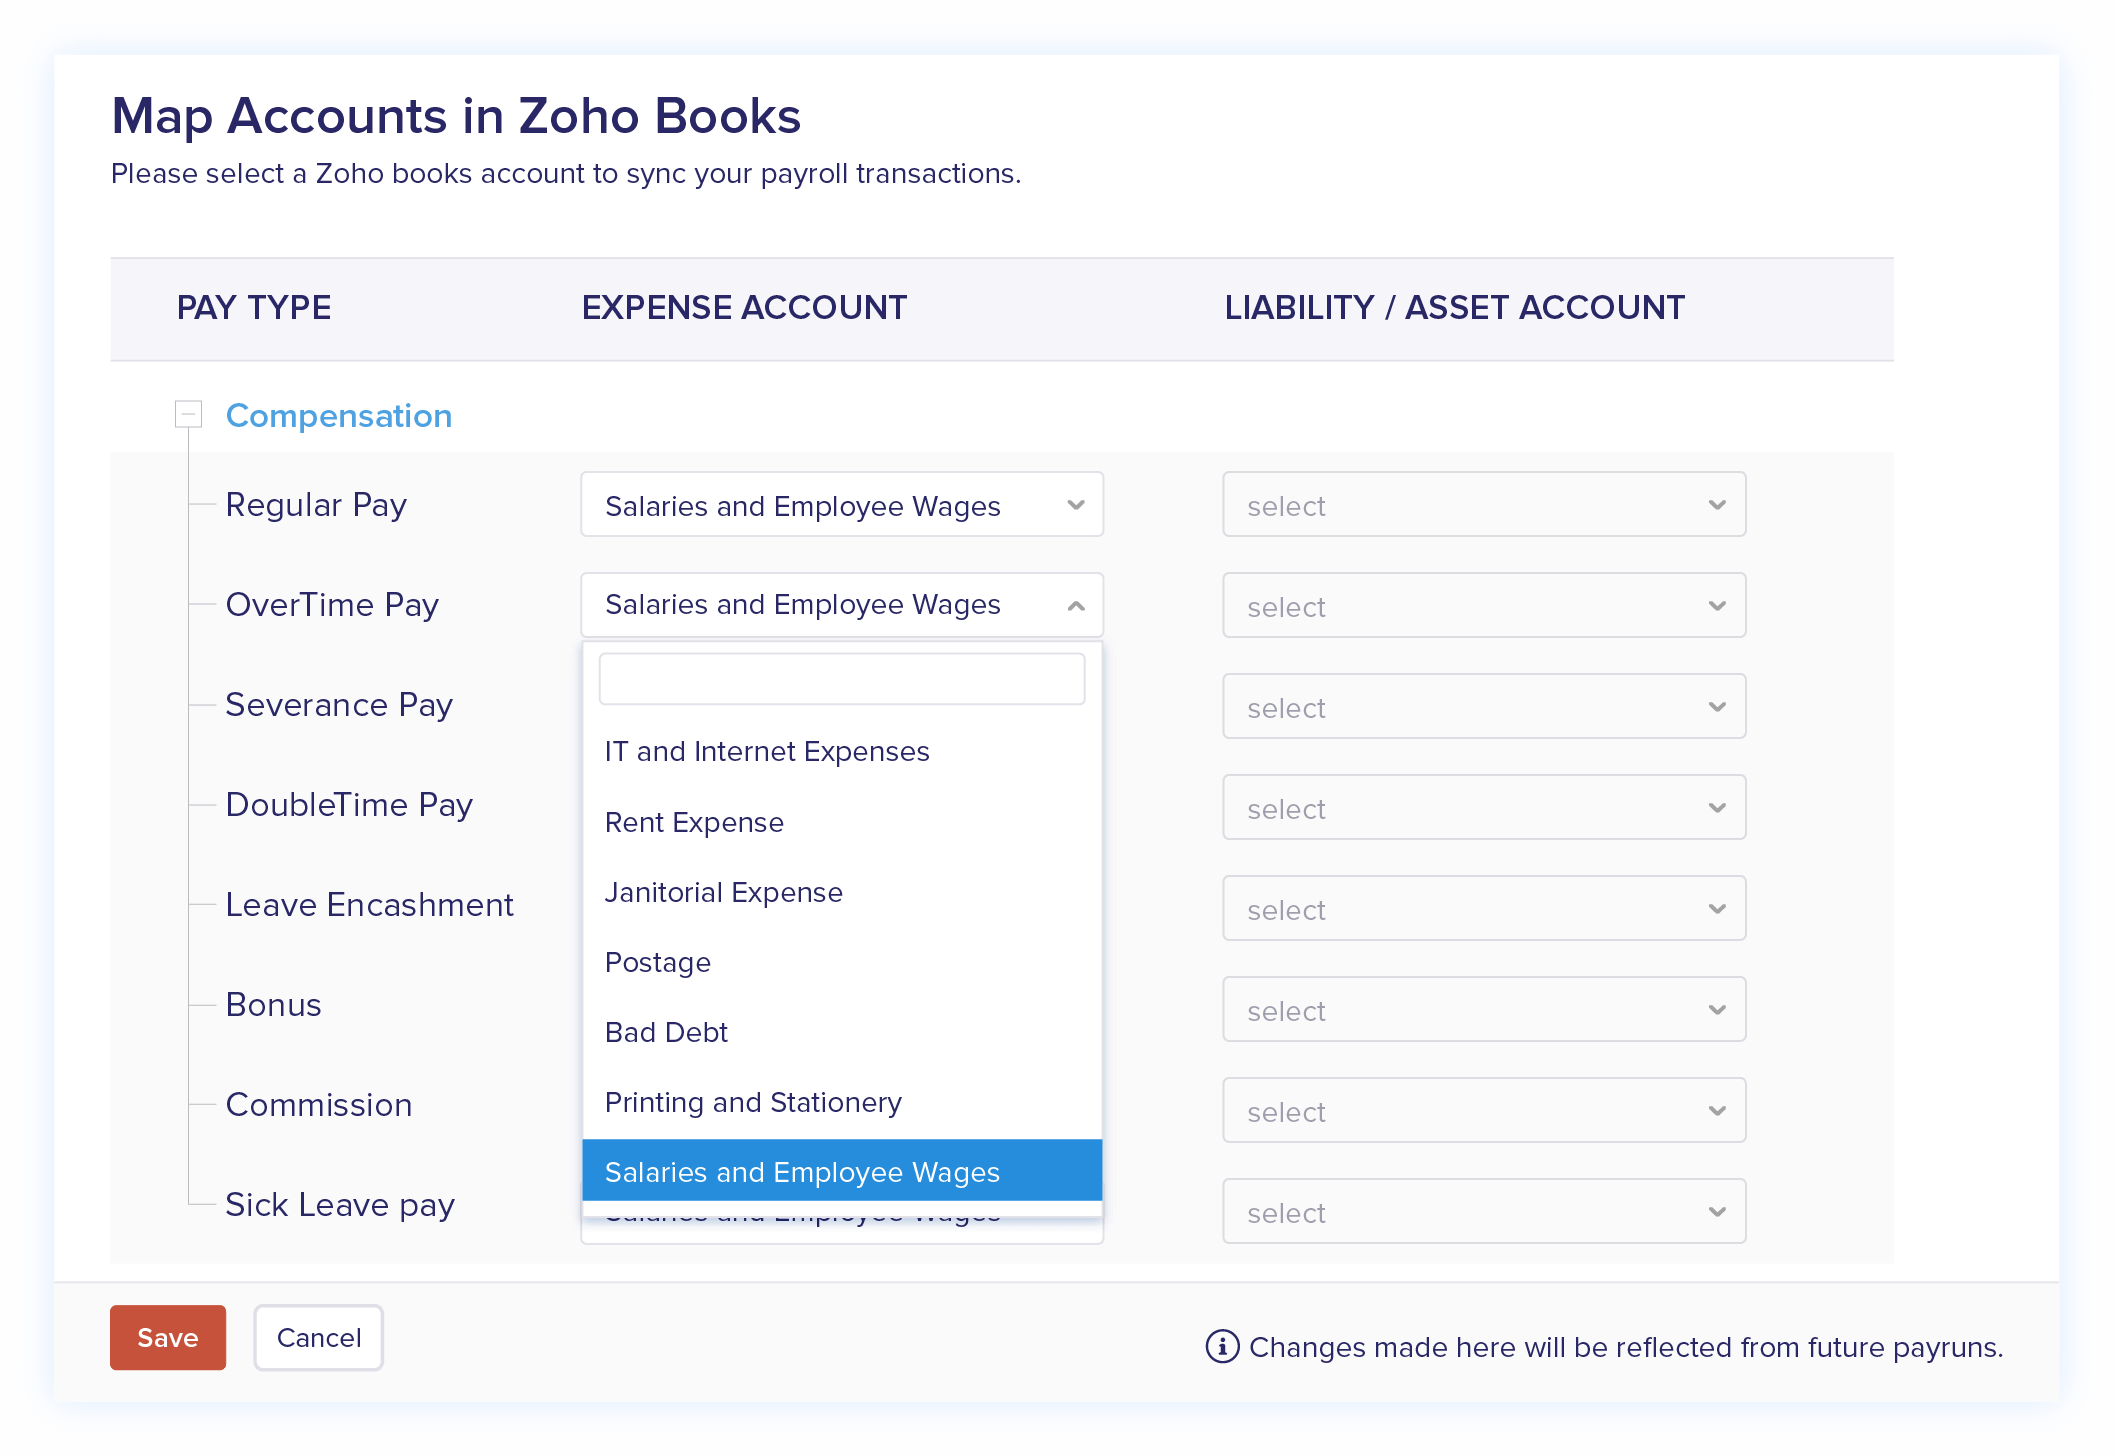 Map accounts within Zoho Books